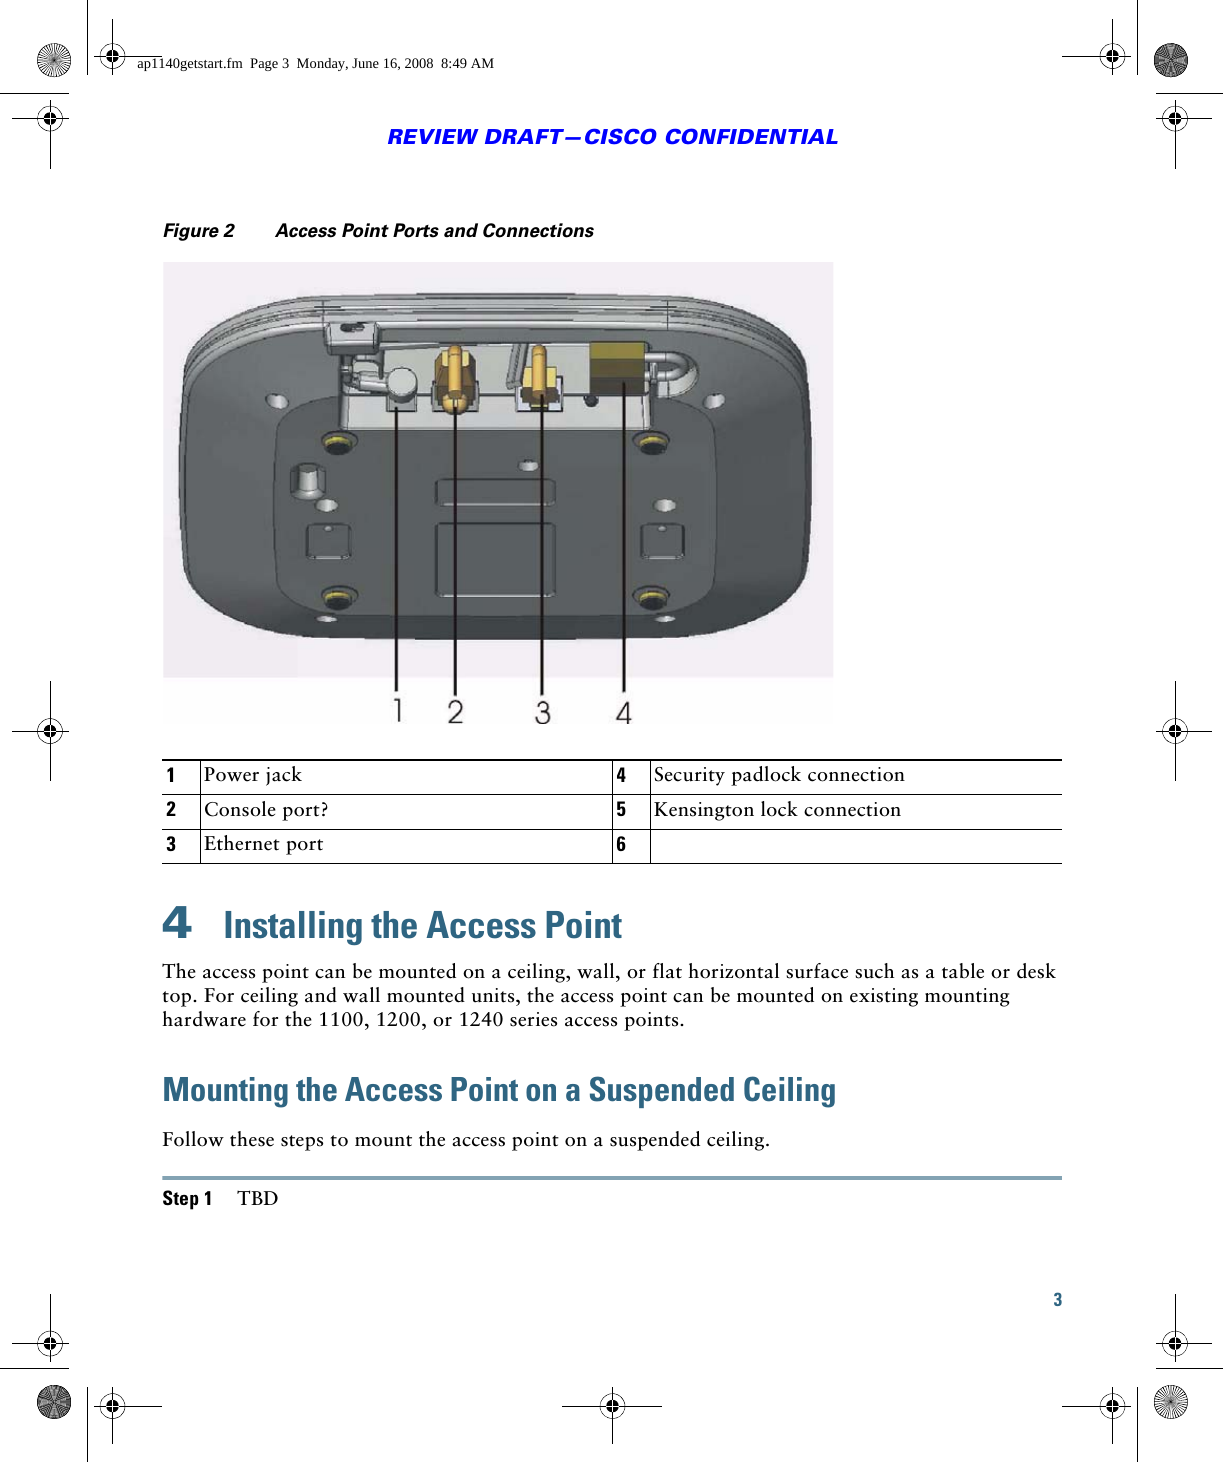 3REVIEW DRAFT—CISCO CONFIDENTIALFigure 2 Access Point Ports and Connections4  Installing the Access PointThe access point can be mounted on a ceiling, wall, or flat horizontal surface such as a table or desk top. For ceiling and wall mounted units, the access point can be mounted on existing mounting hardware for the 1100, 1200, or 1240 series access points. Mounting the Access Point on a Suspended CeilingFollow these steps to mount the access point on a suspended ceiling.Step 1 TBD1Power jack 4Security padlock connection2Console port? 5Kensington lock connection3Ethernet port 6ap1140getstart.fm  Page 3  Monday, June 16, 2008  8:49 AM